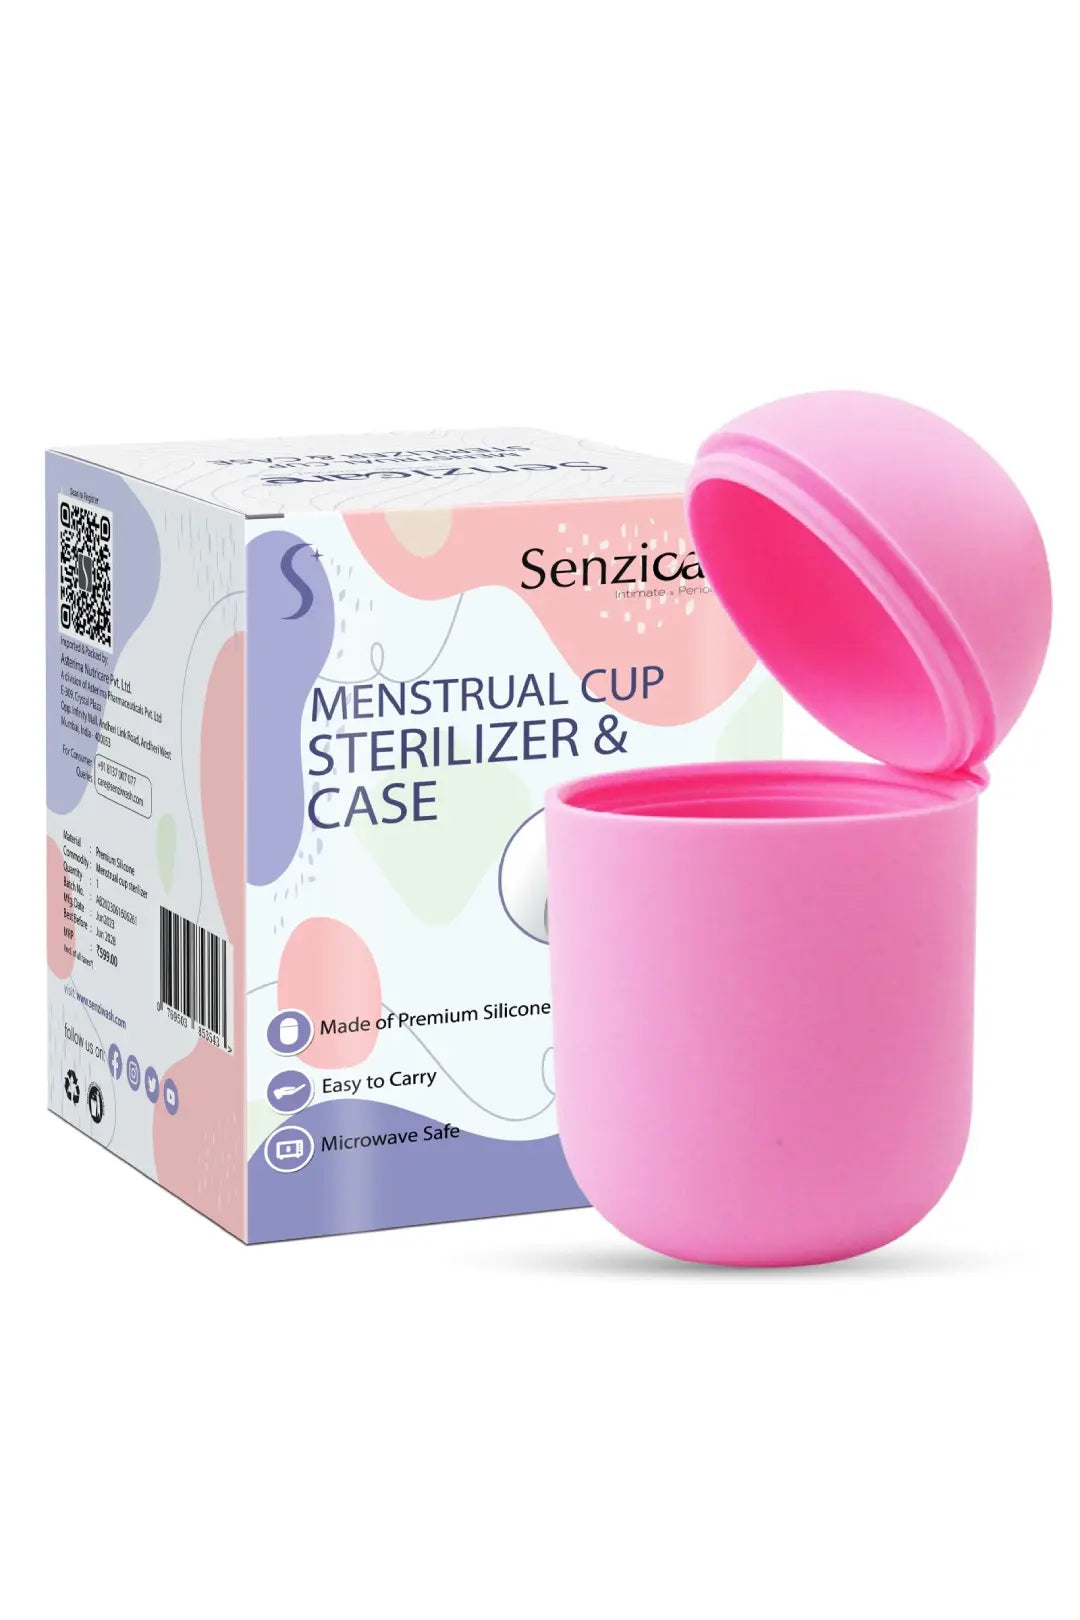 Menstrual Cup Sterilizer and Case for Women